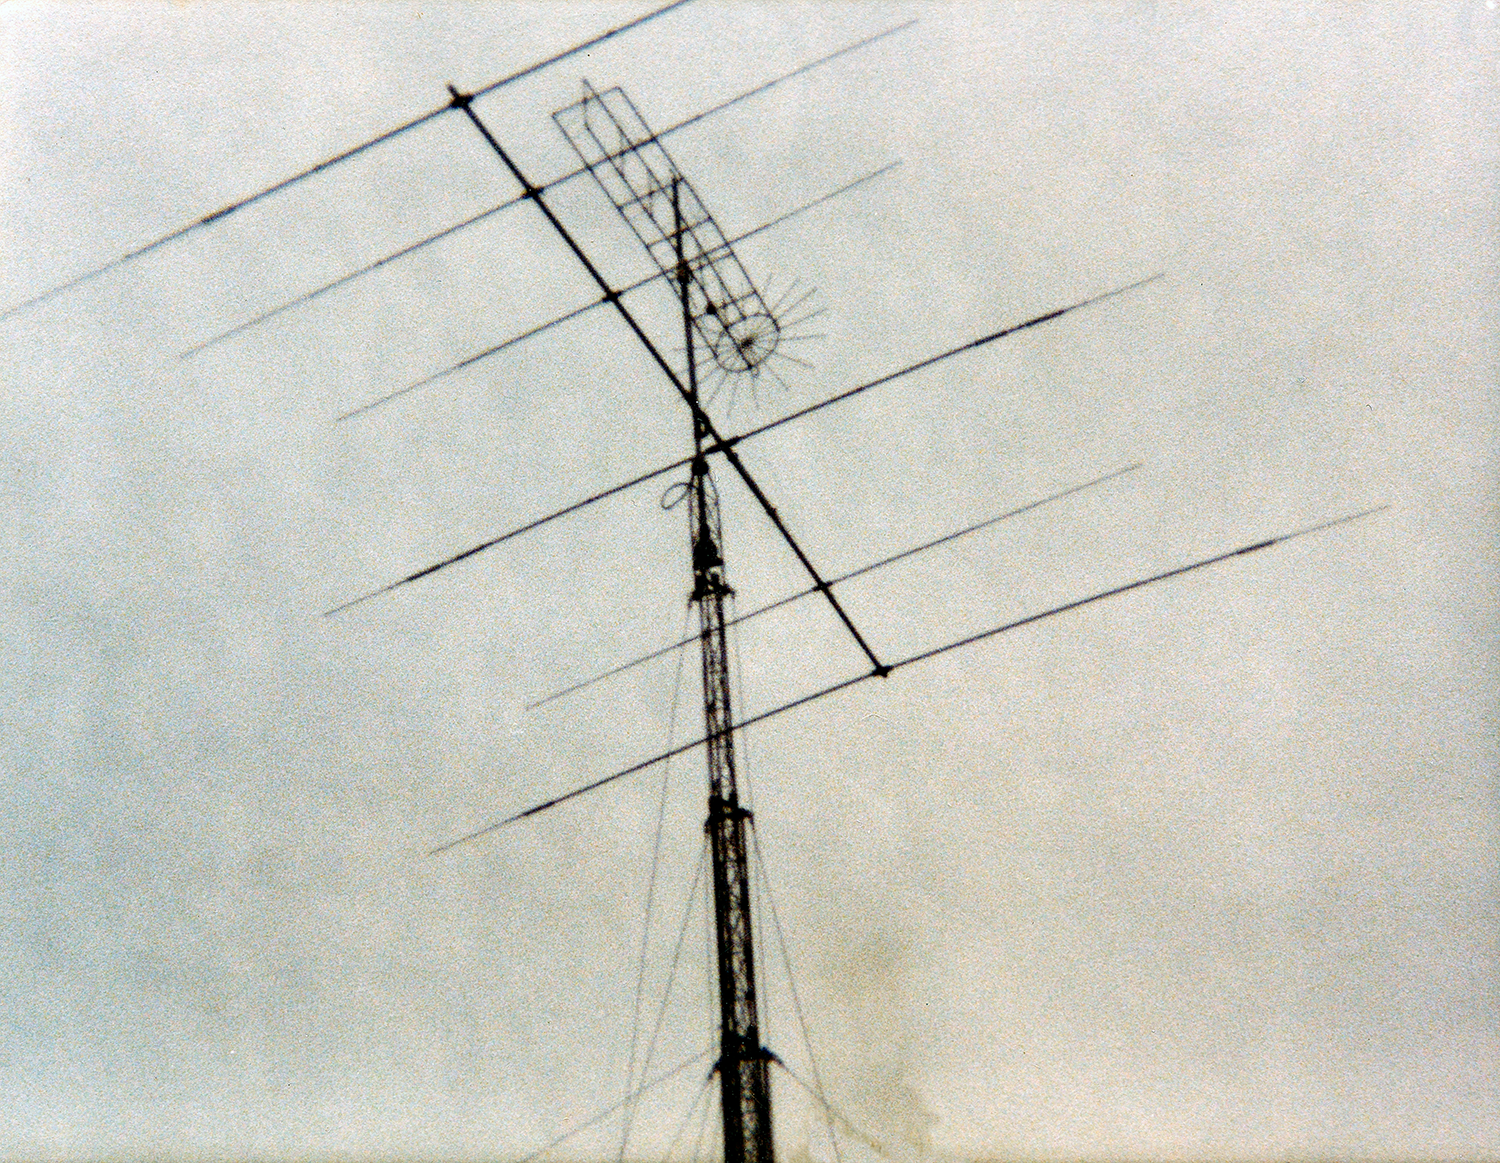 The Antennas back in the day was a 'Homemade' Round VHF Antenna and a Hy-Gain TH-7